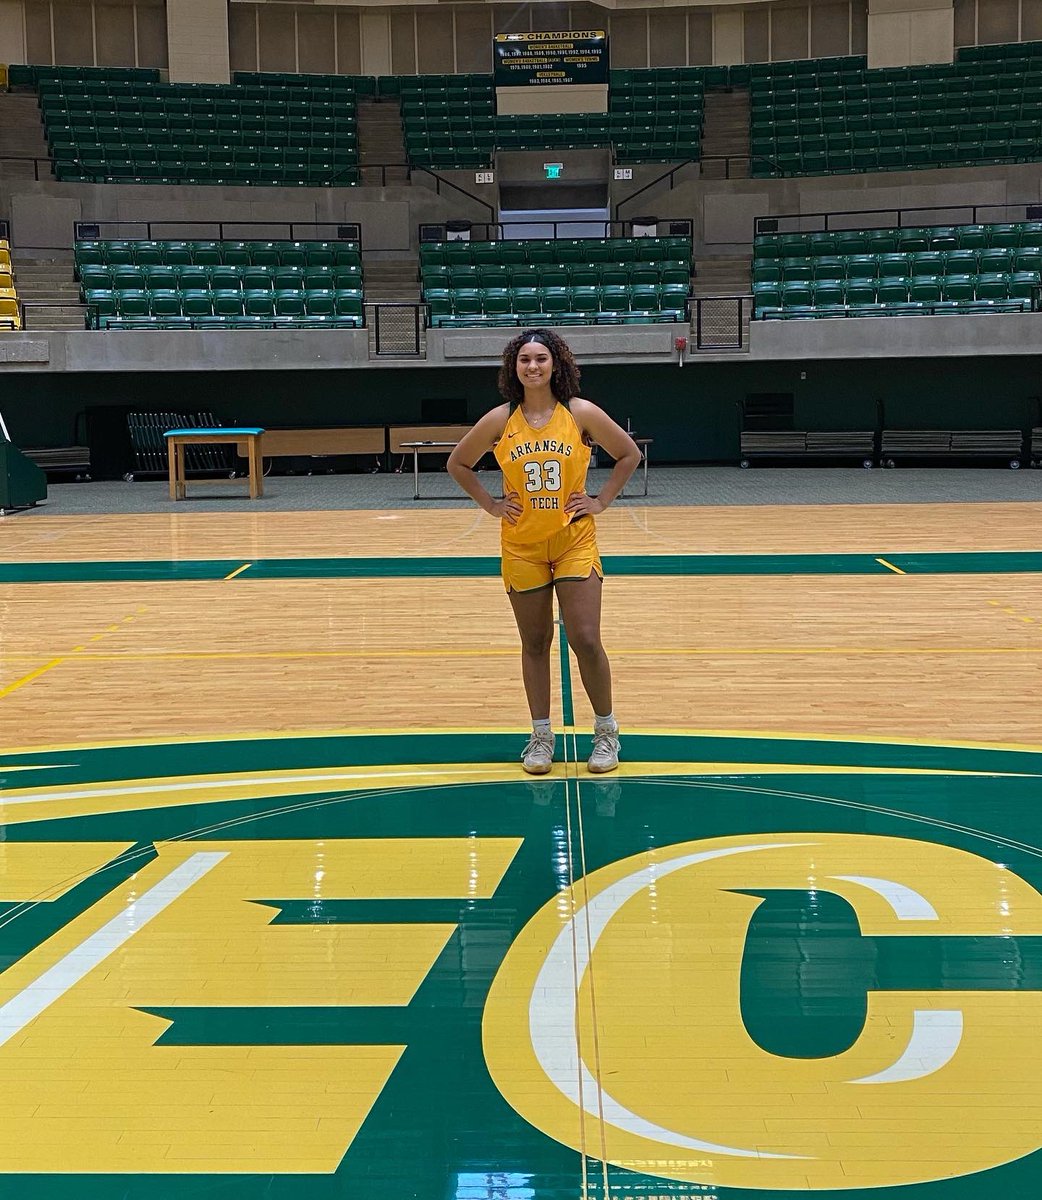 Had a great visit at Arkansas Tech!! Thank you for the amazing hospitality! @bpalm5 @WilbersDave